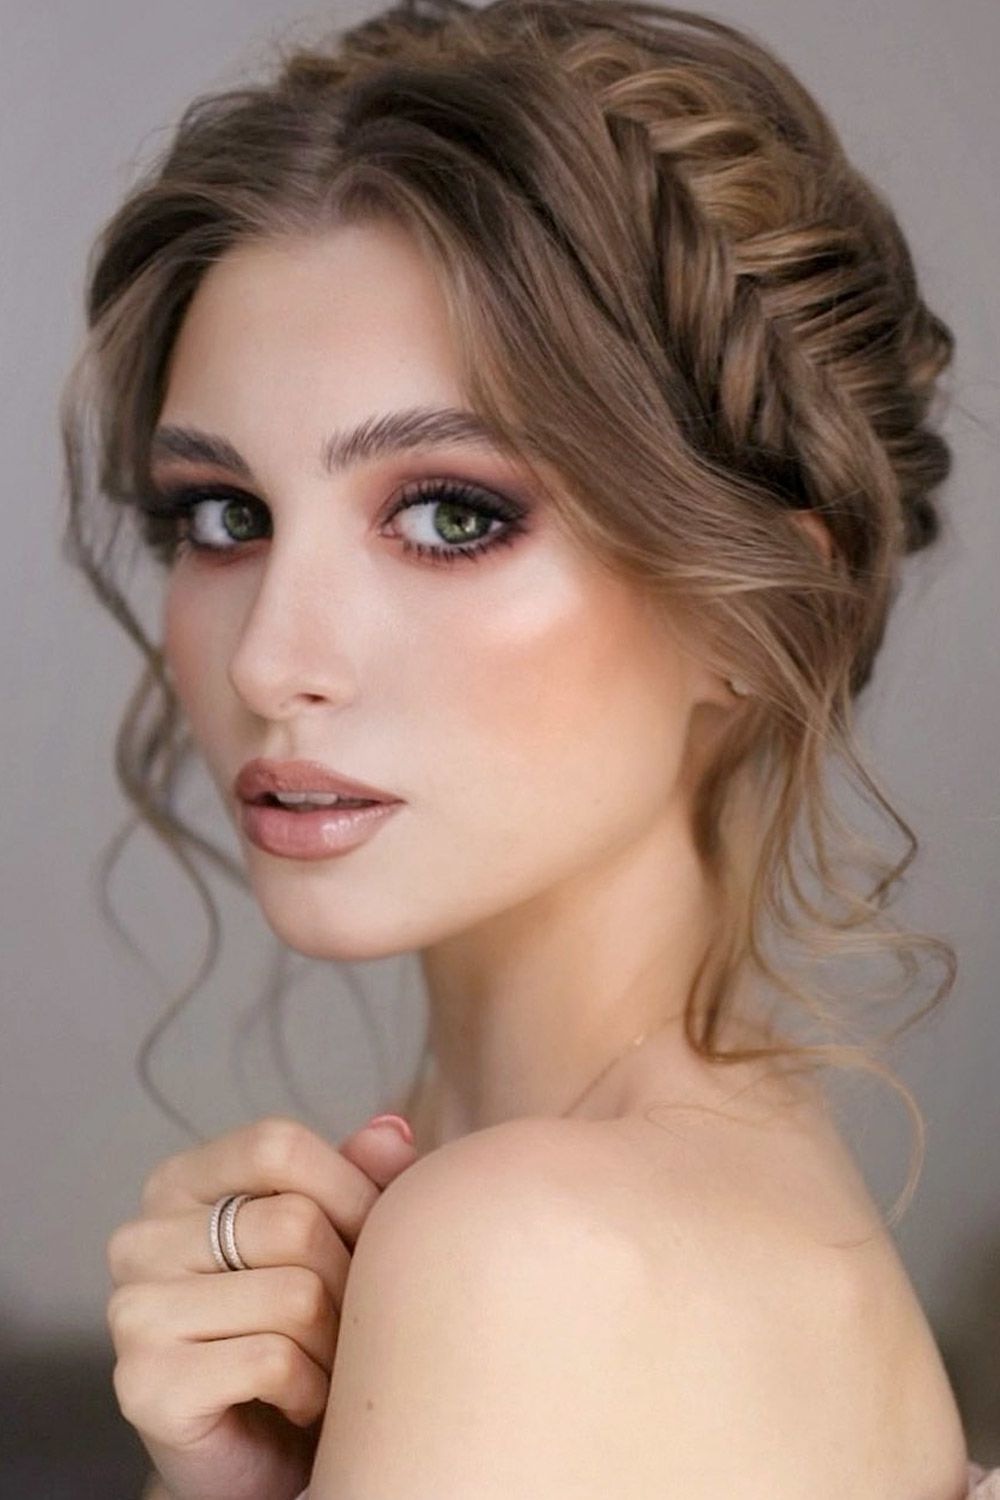 Braided Updo Hairstyles